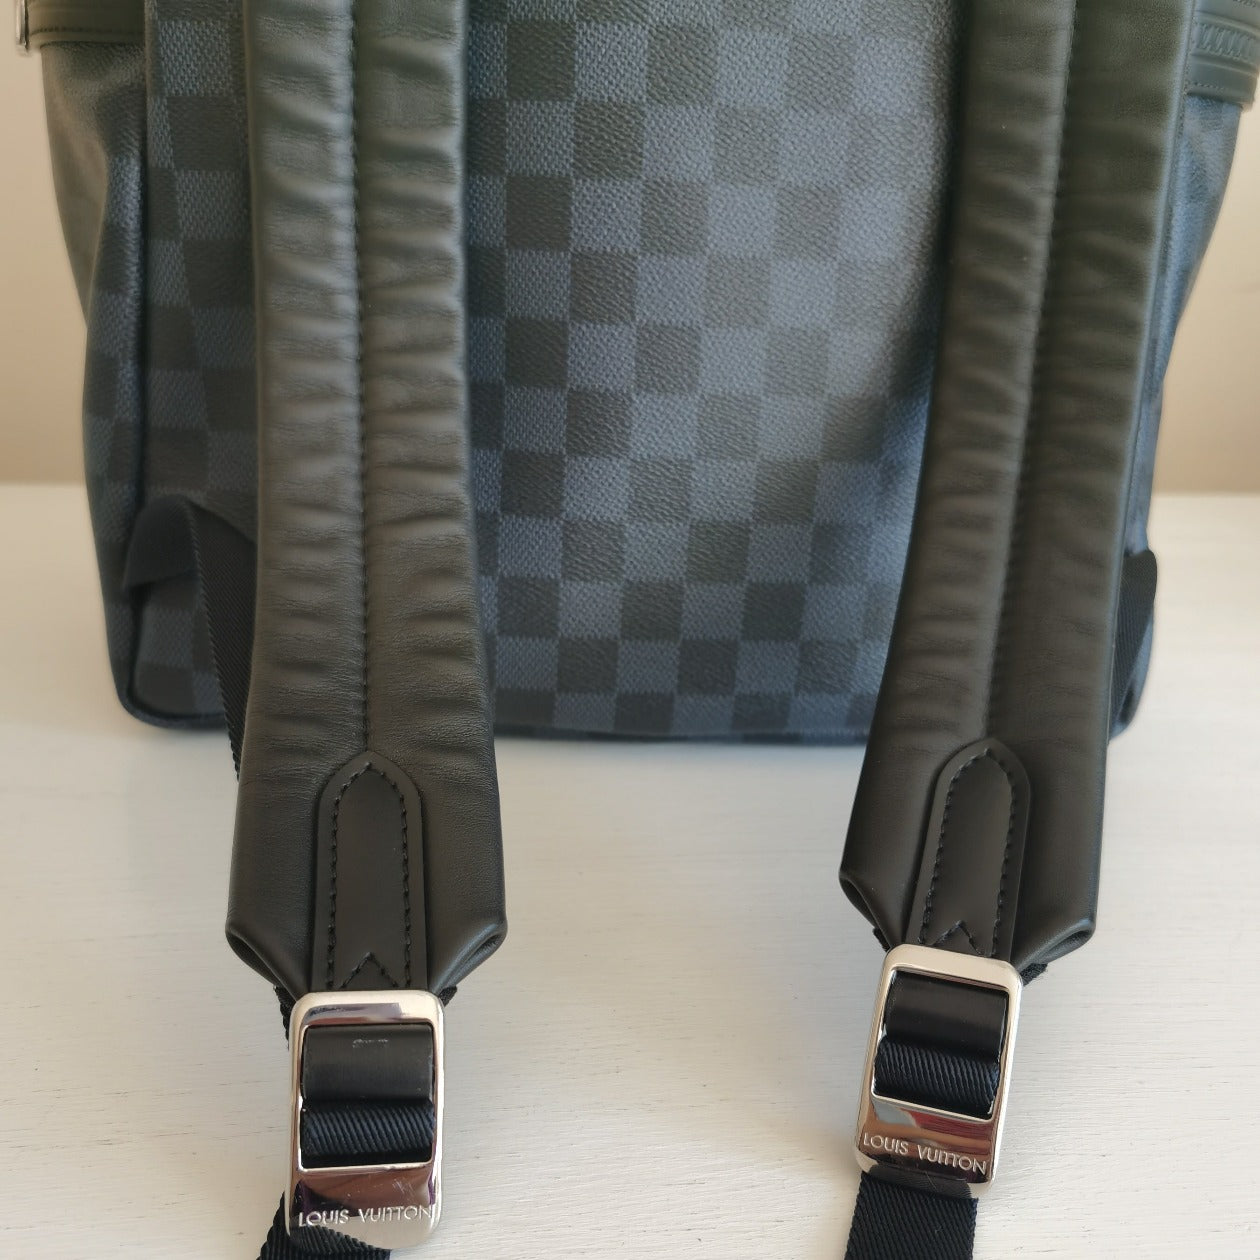 Sold at Auction: Louis Vuitton Apollo Backpack Rucksack